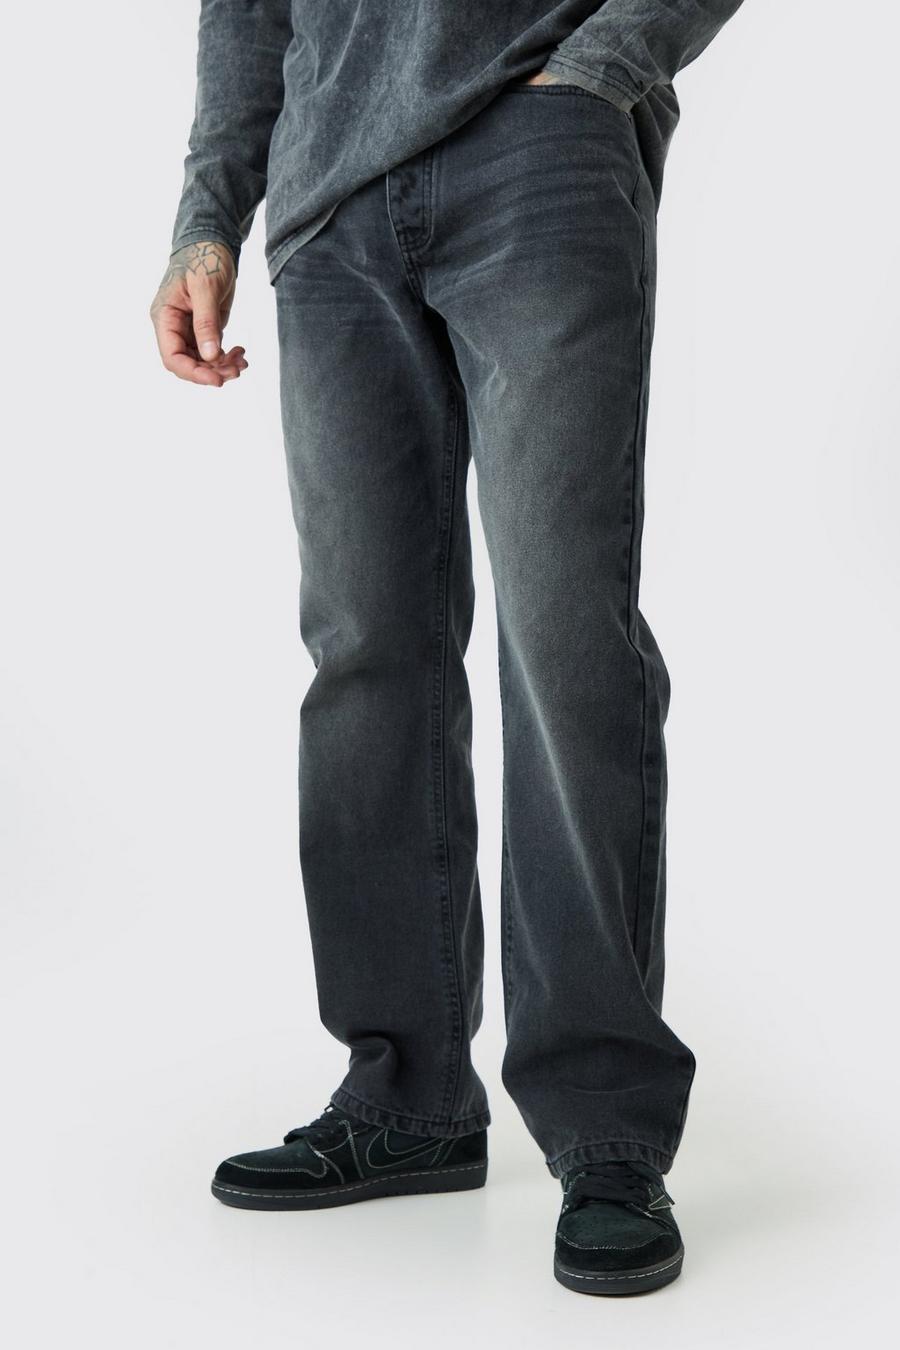 Charcoal grey Tall Relaxed Rigid Jeans